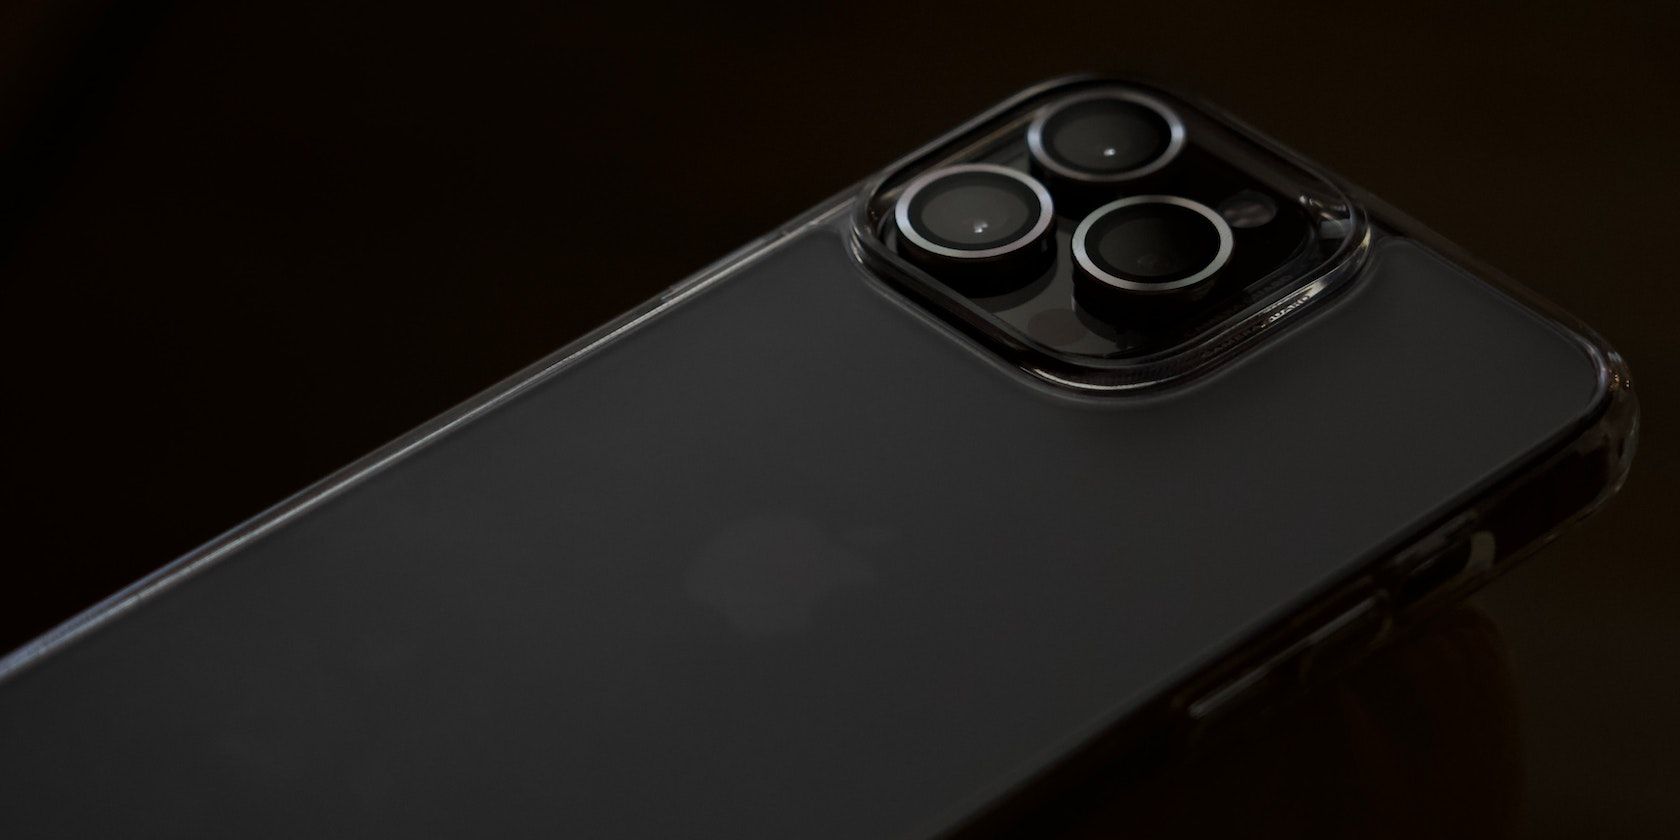 Black iPhone on a black background